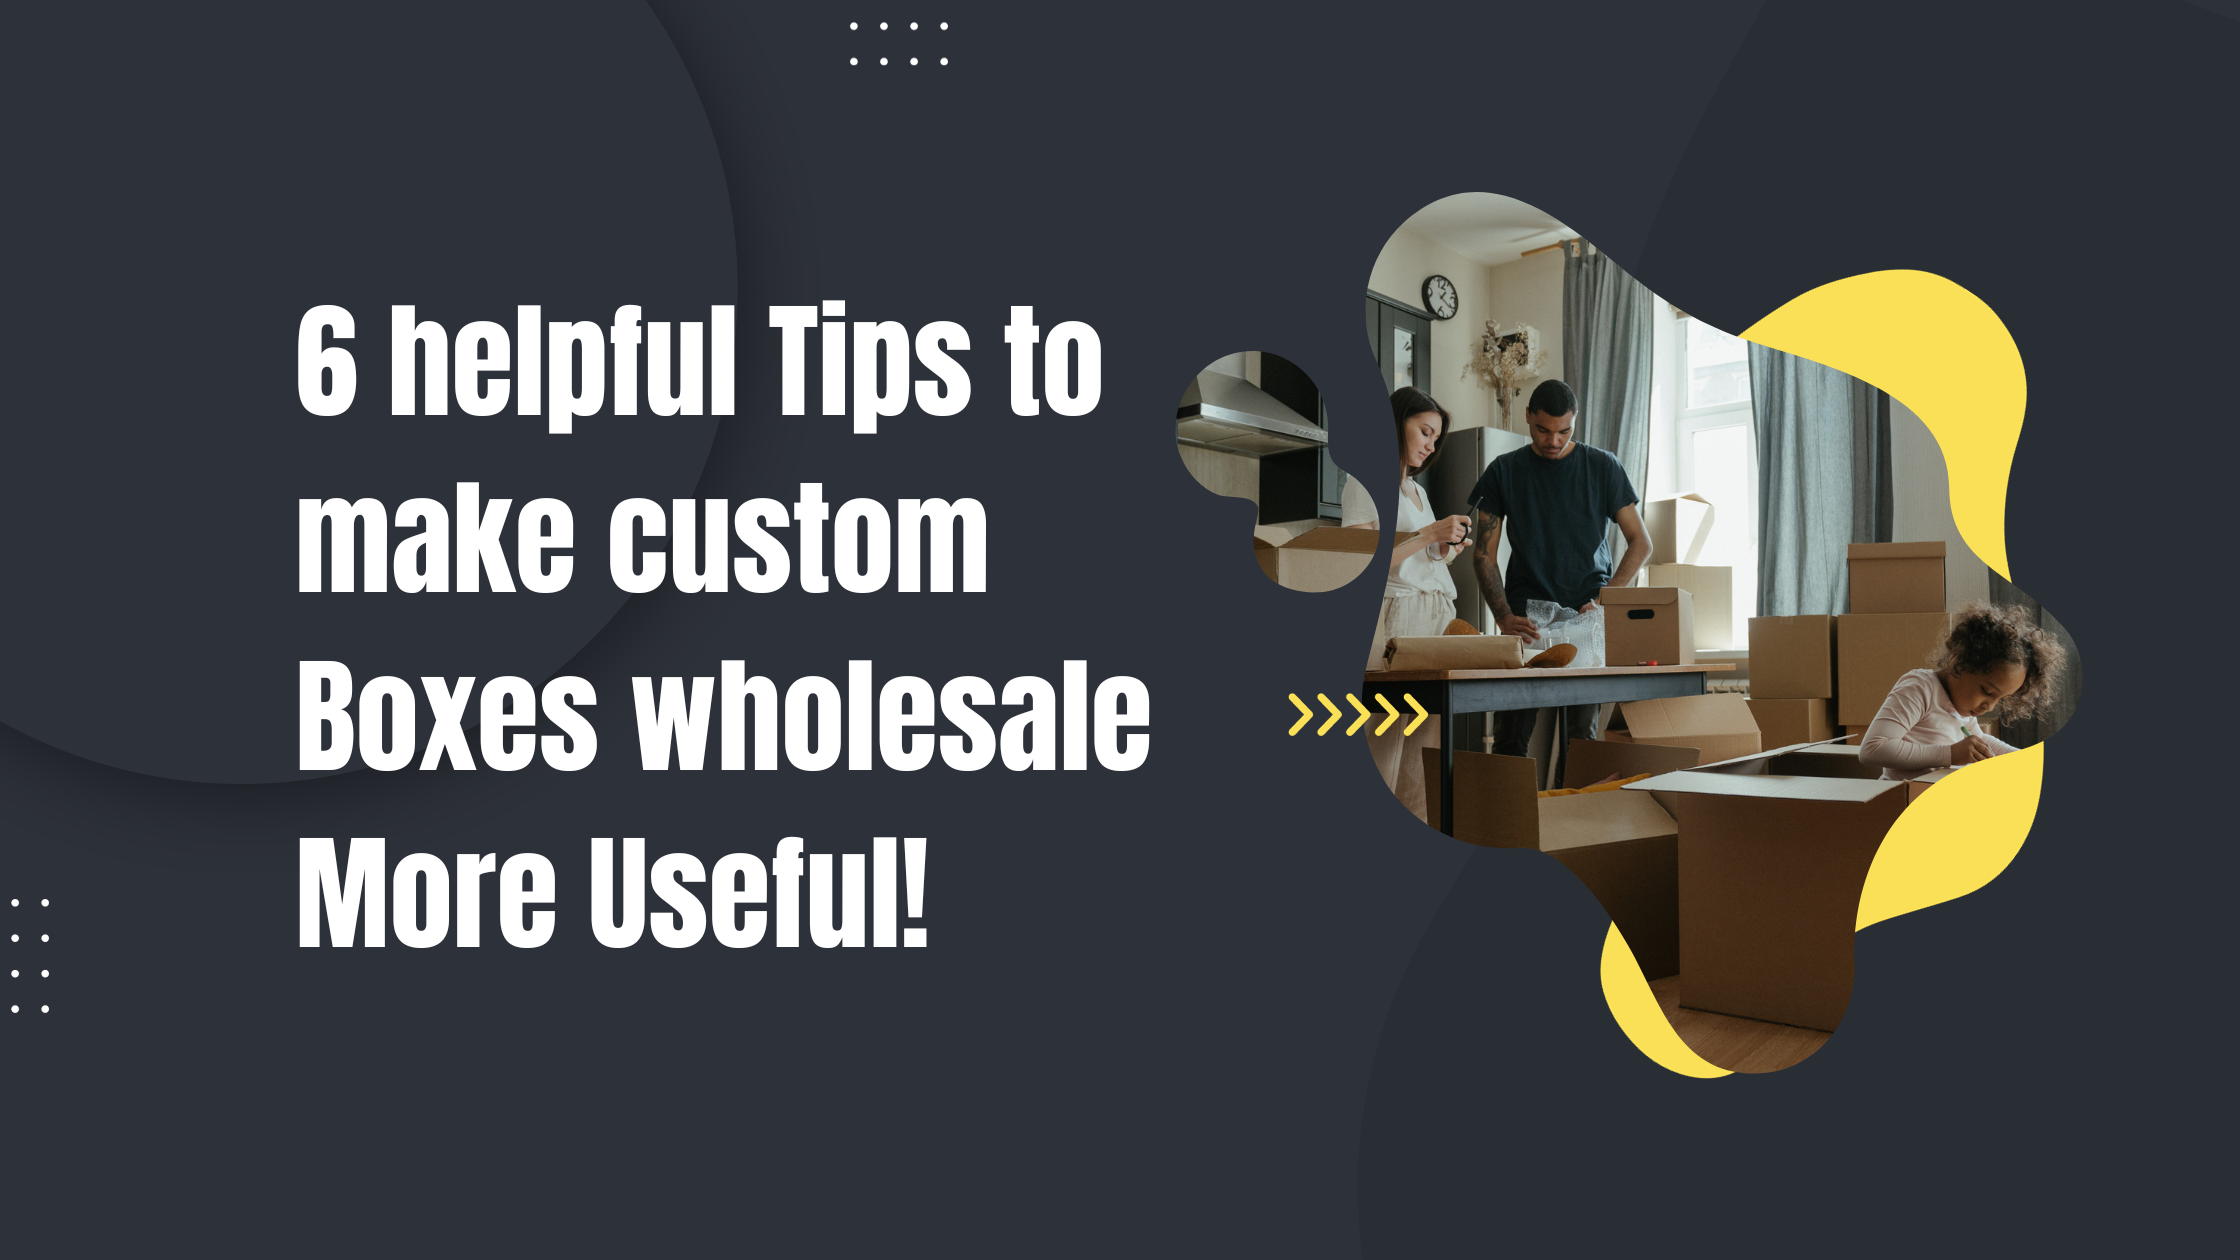 6 helpful Tips to make custom Boxes wholesale More Useful